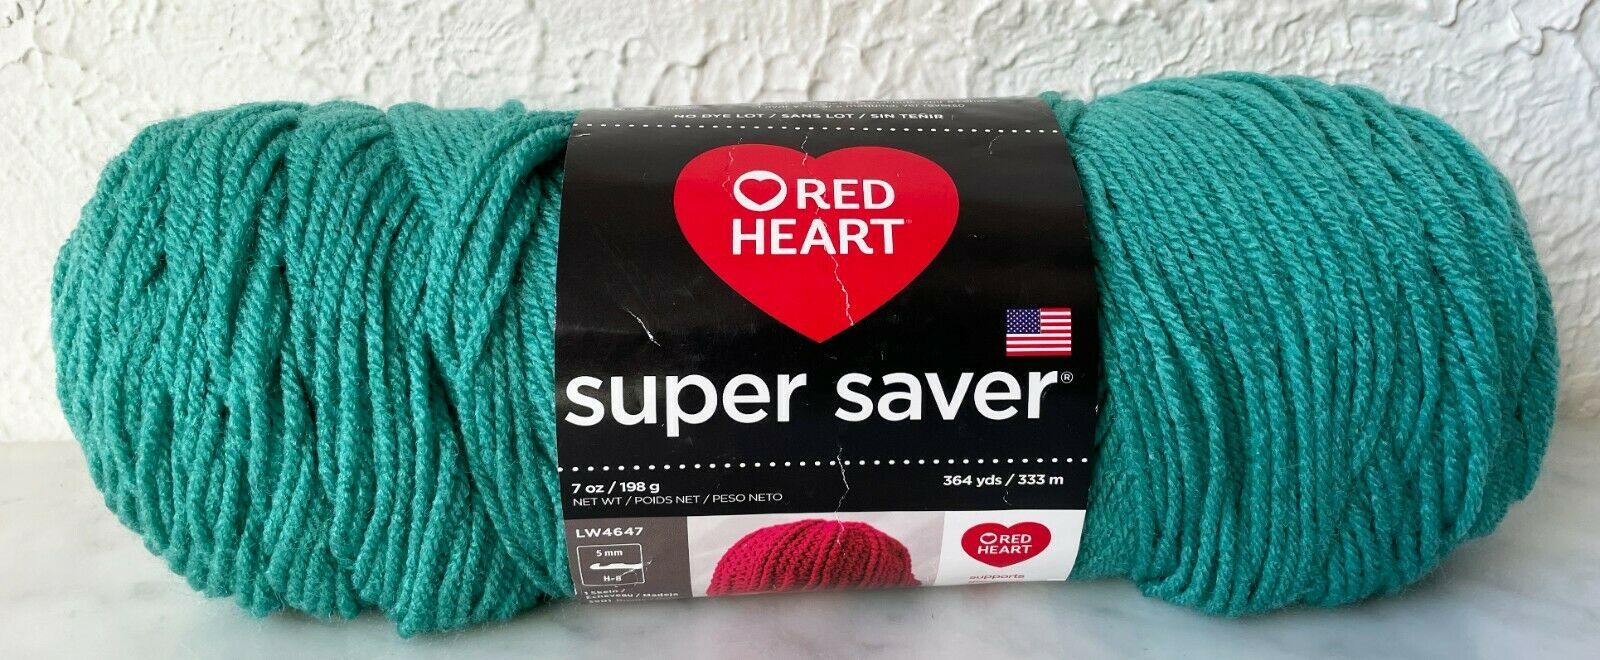 Primary image for Red Heart Super Saver Medium Weight Acrylic Yarn - 1 Skein Jade #3862